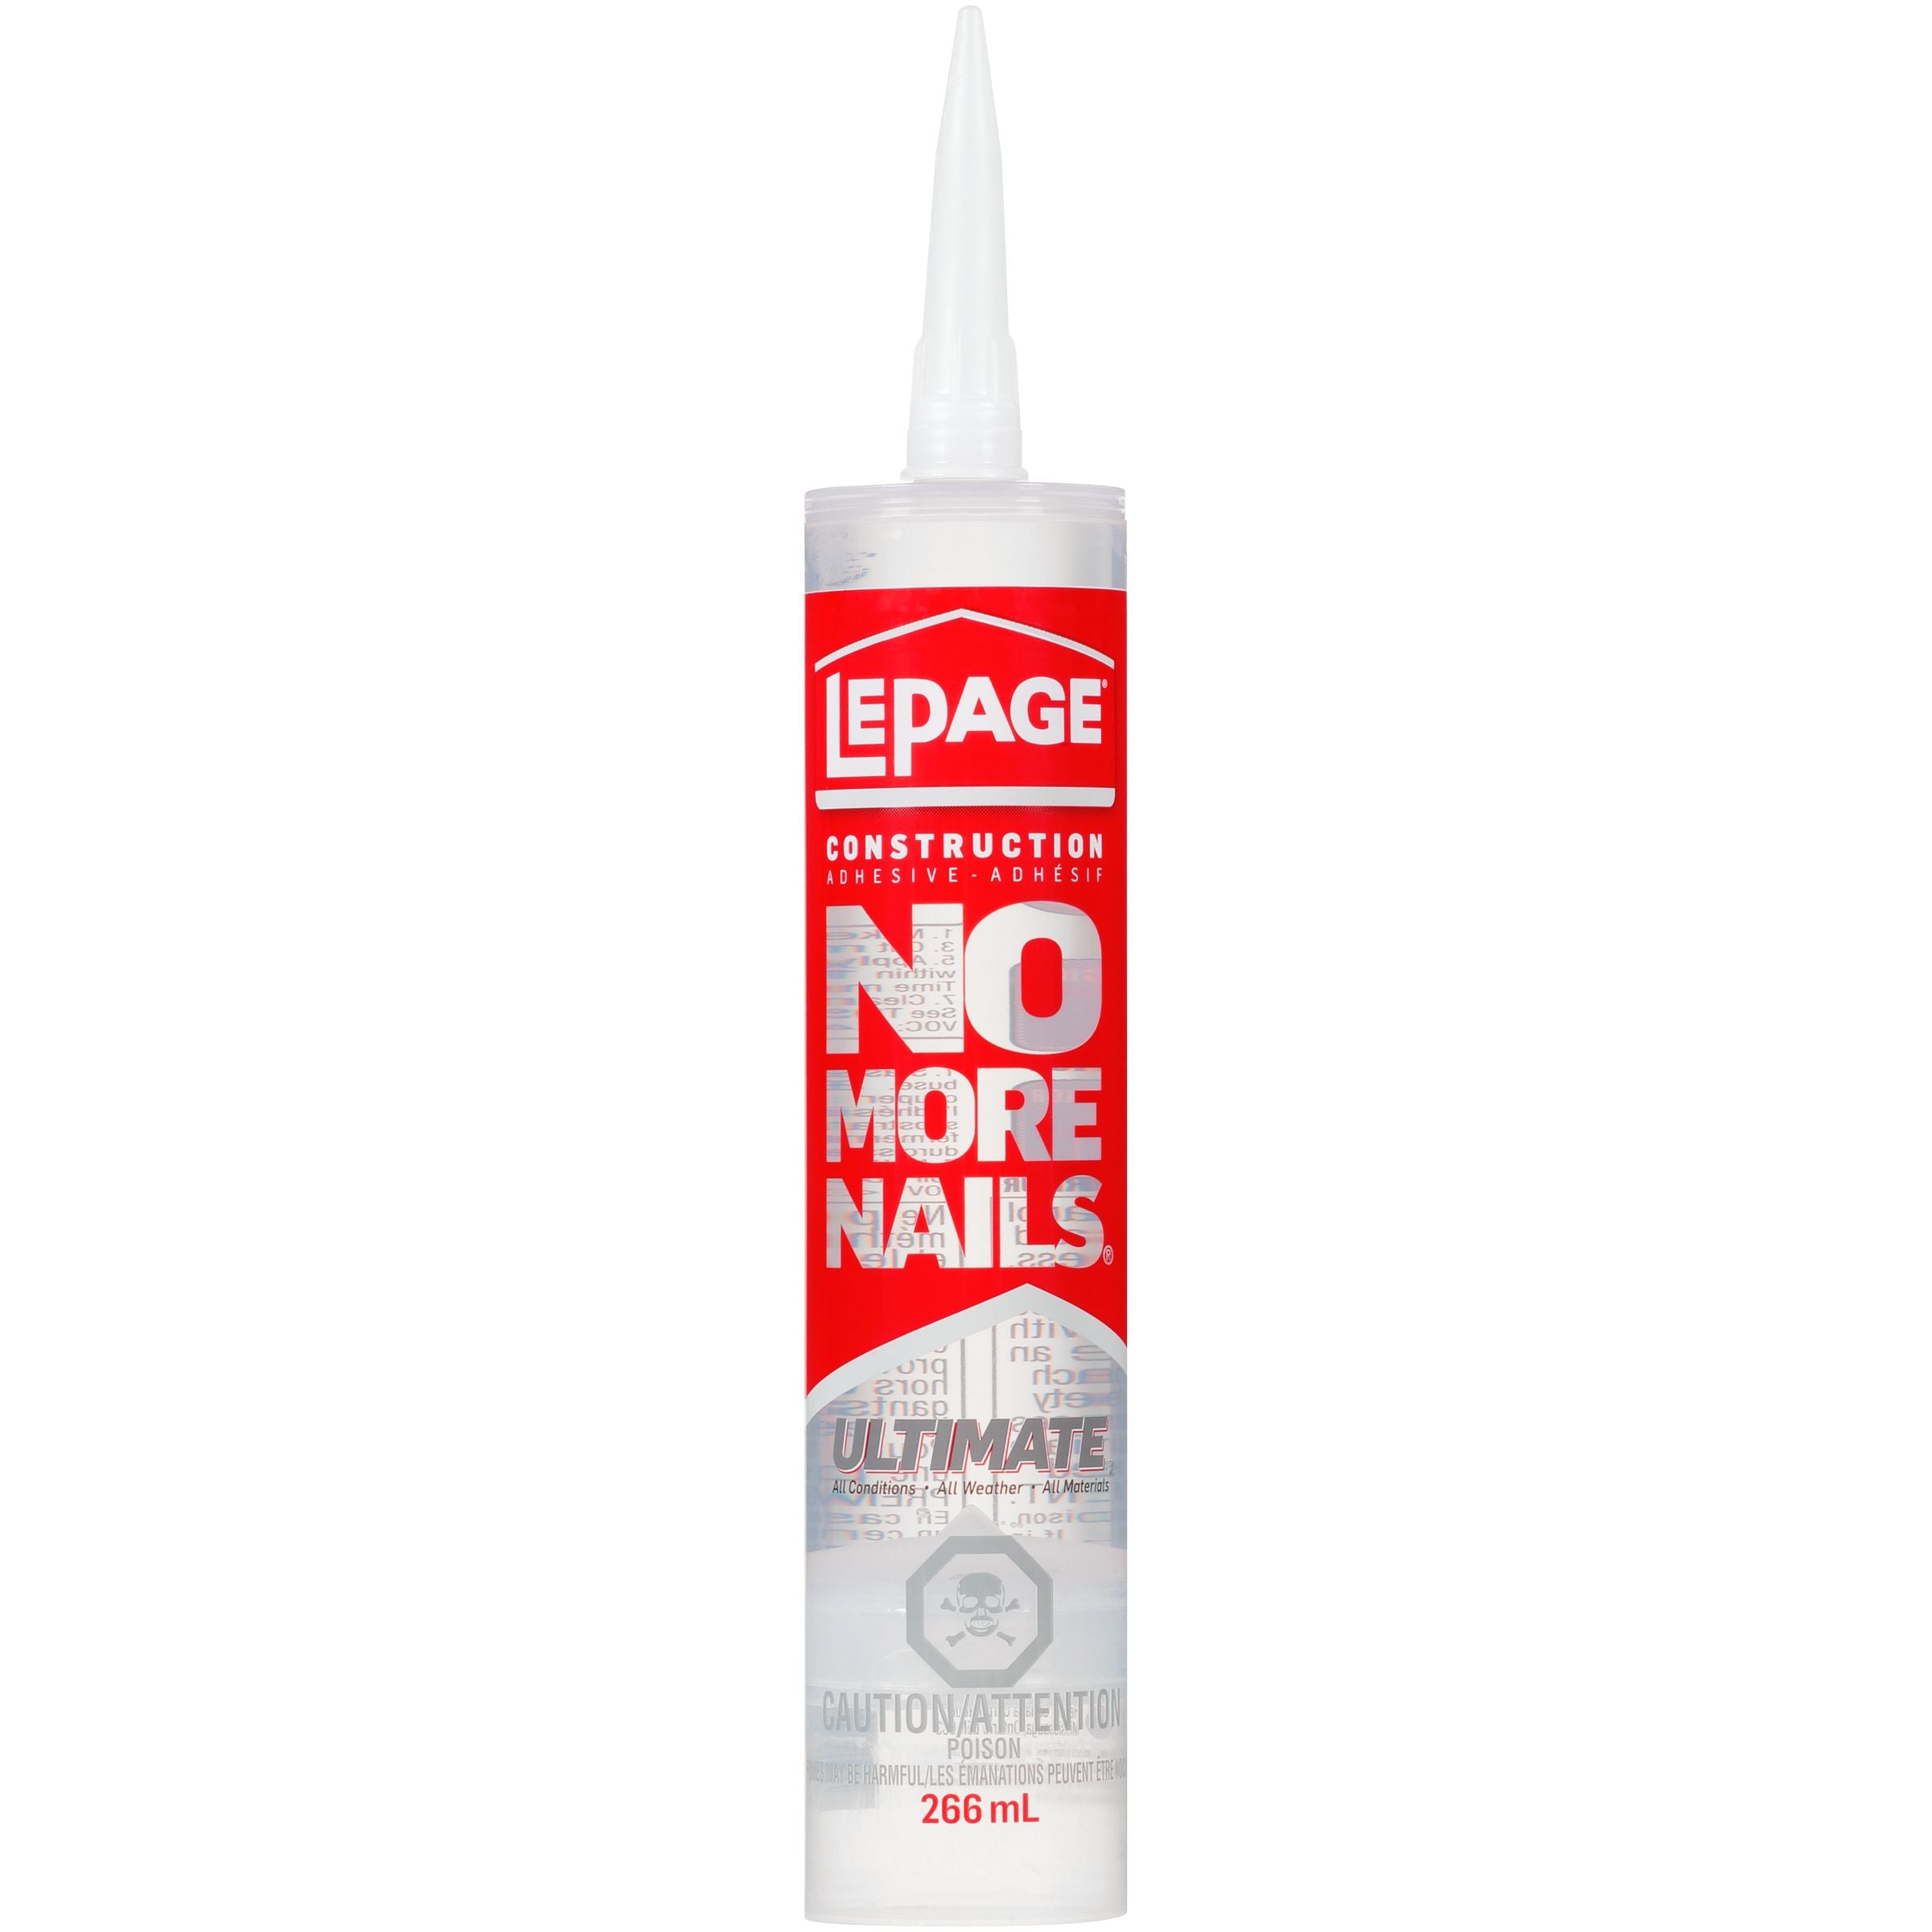 LePage No More Nails Ultimate Crystal Clear Construction Adhesive, Clear, 266 ml Cartridge, Pack of 1